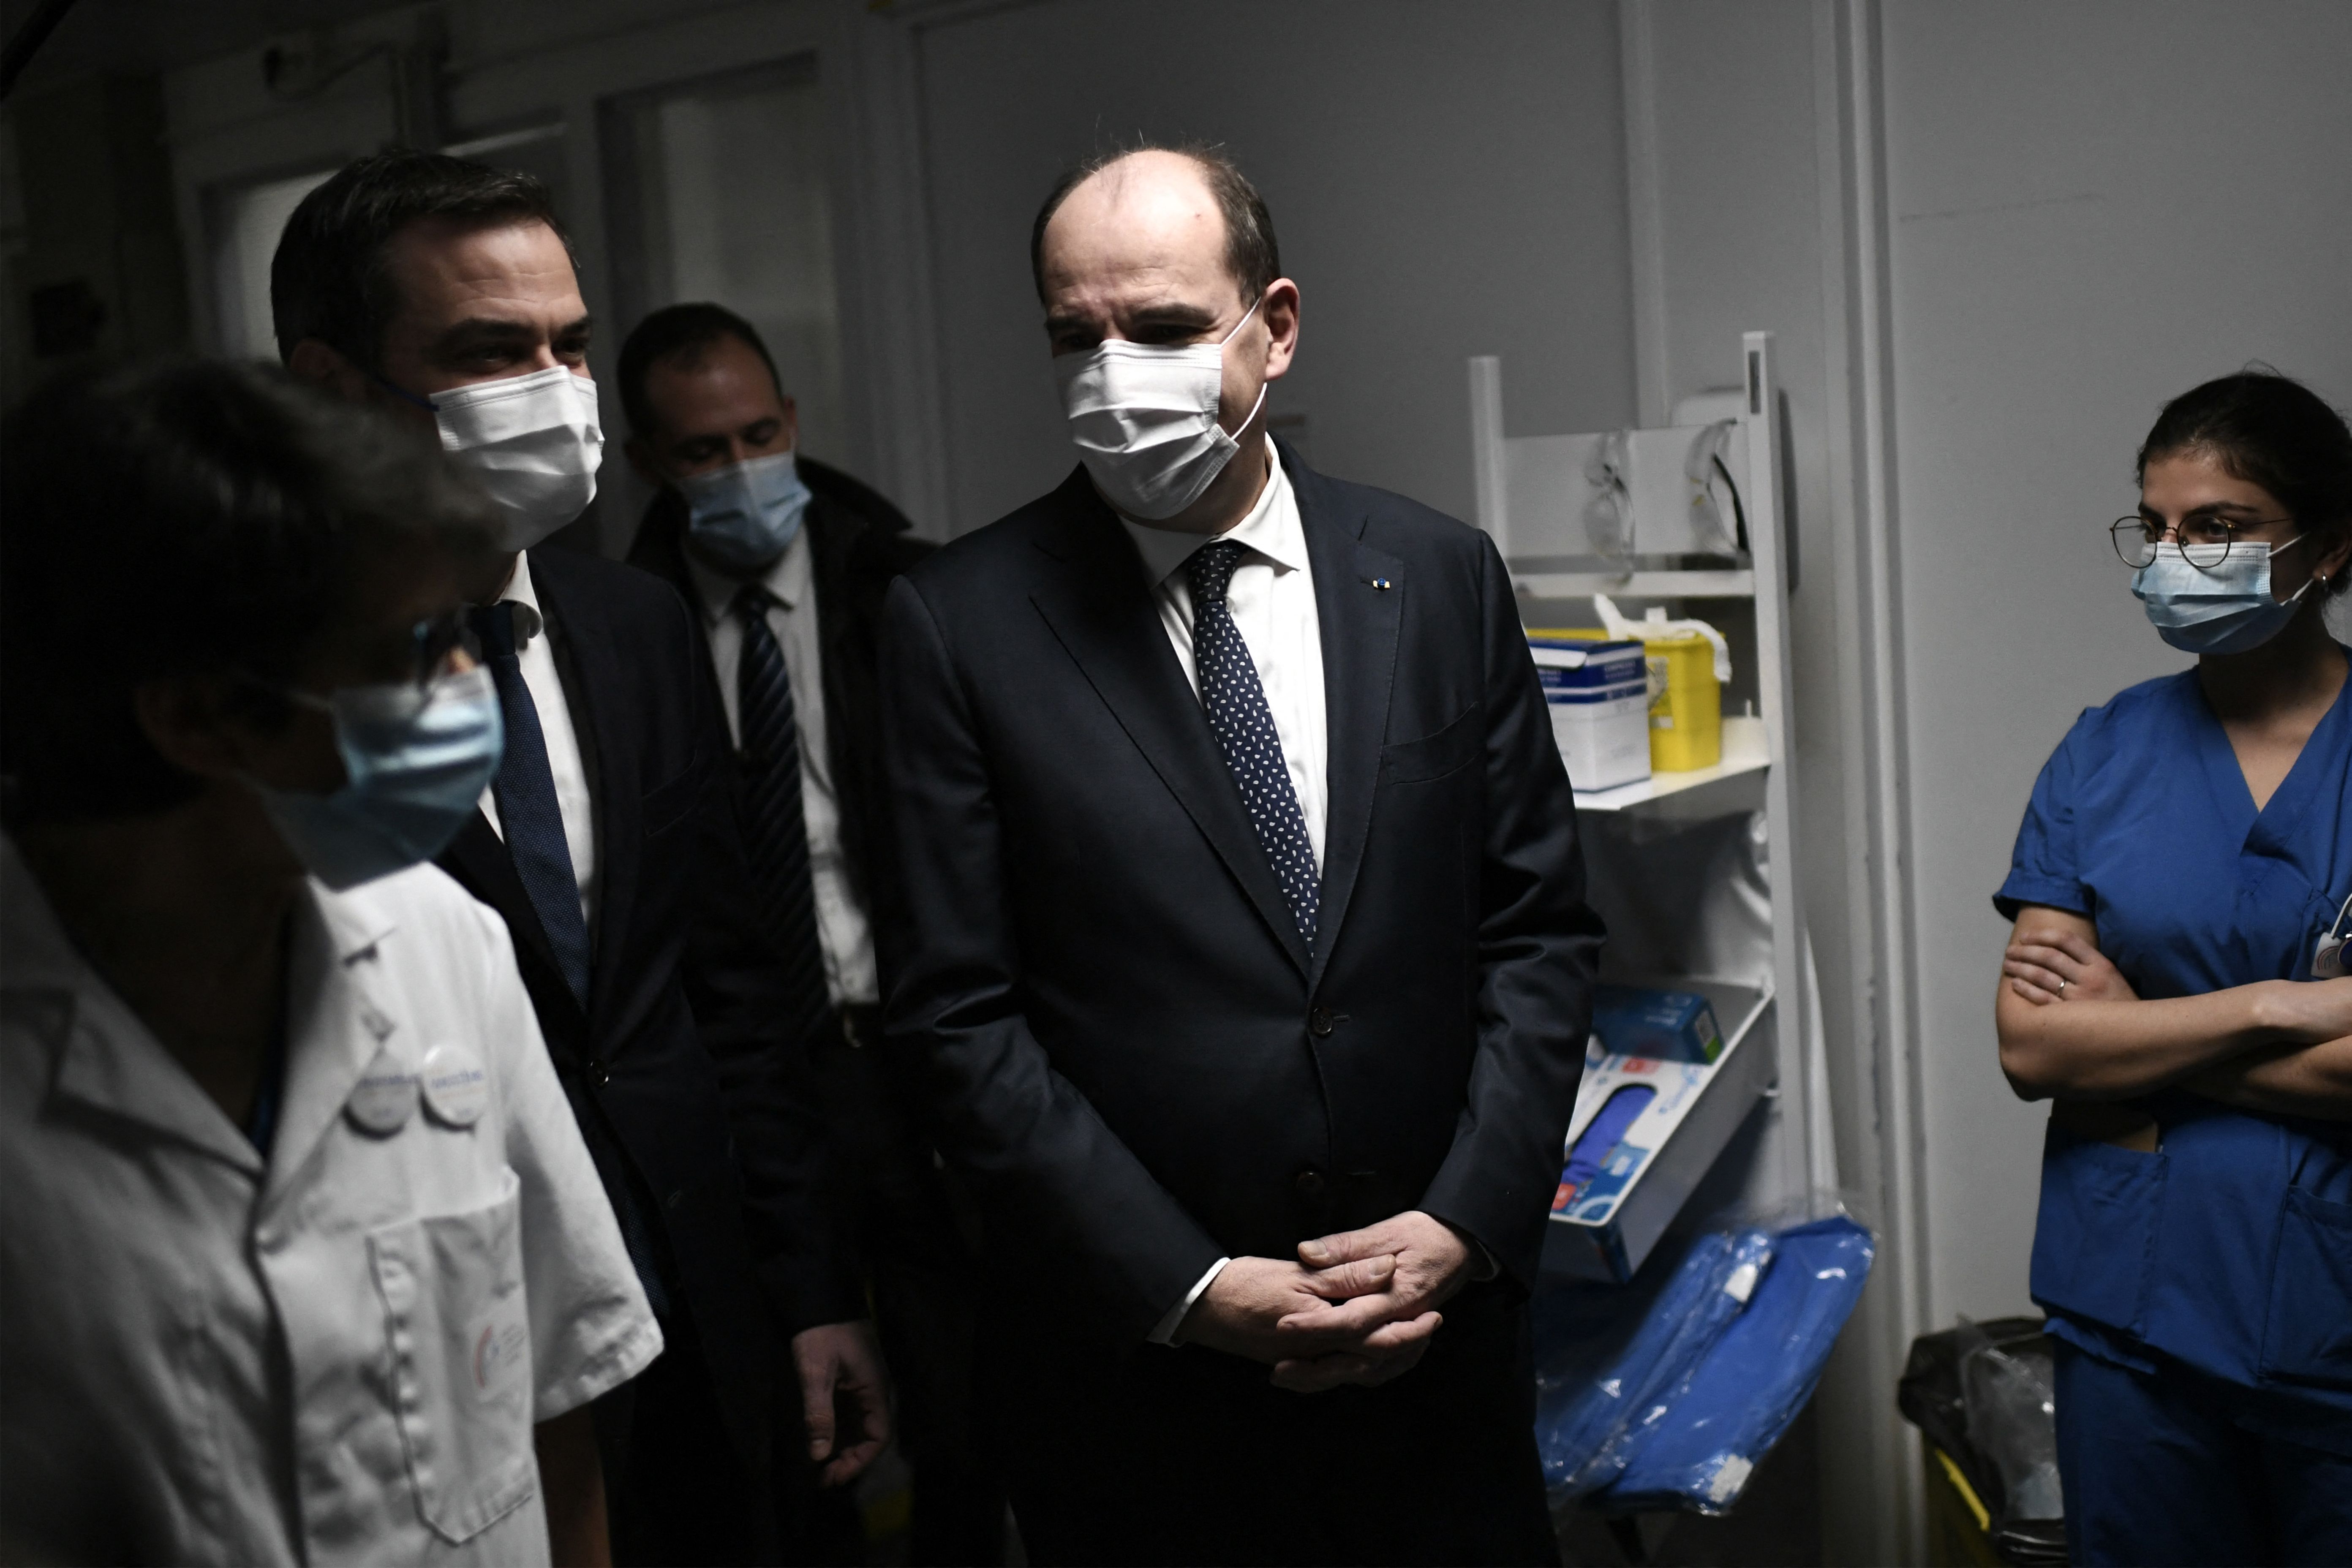 France's Prime Minister Jean Castex (C) and France's Health Minister Olivier Veran (L) speak with health workers as they visit the resuscitation unit of the Intercommunal hospital of Creteil, outside Paris, on December 28, 2021. - France reported on December 25 over 100,000 daily Covid cases, a record since the pandemic erupted nearly two years ago, with many experts warning the number would rapidly increase over the coming weeks. 